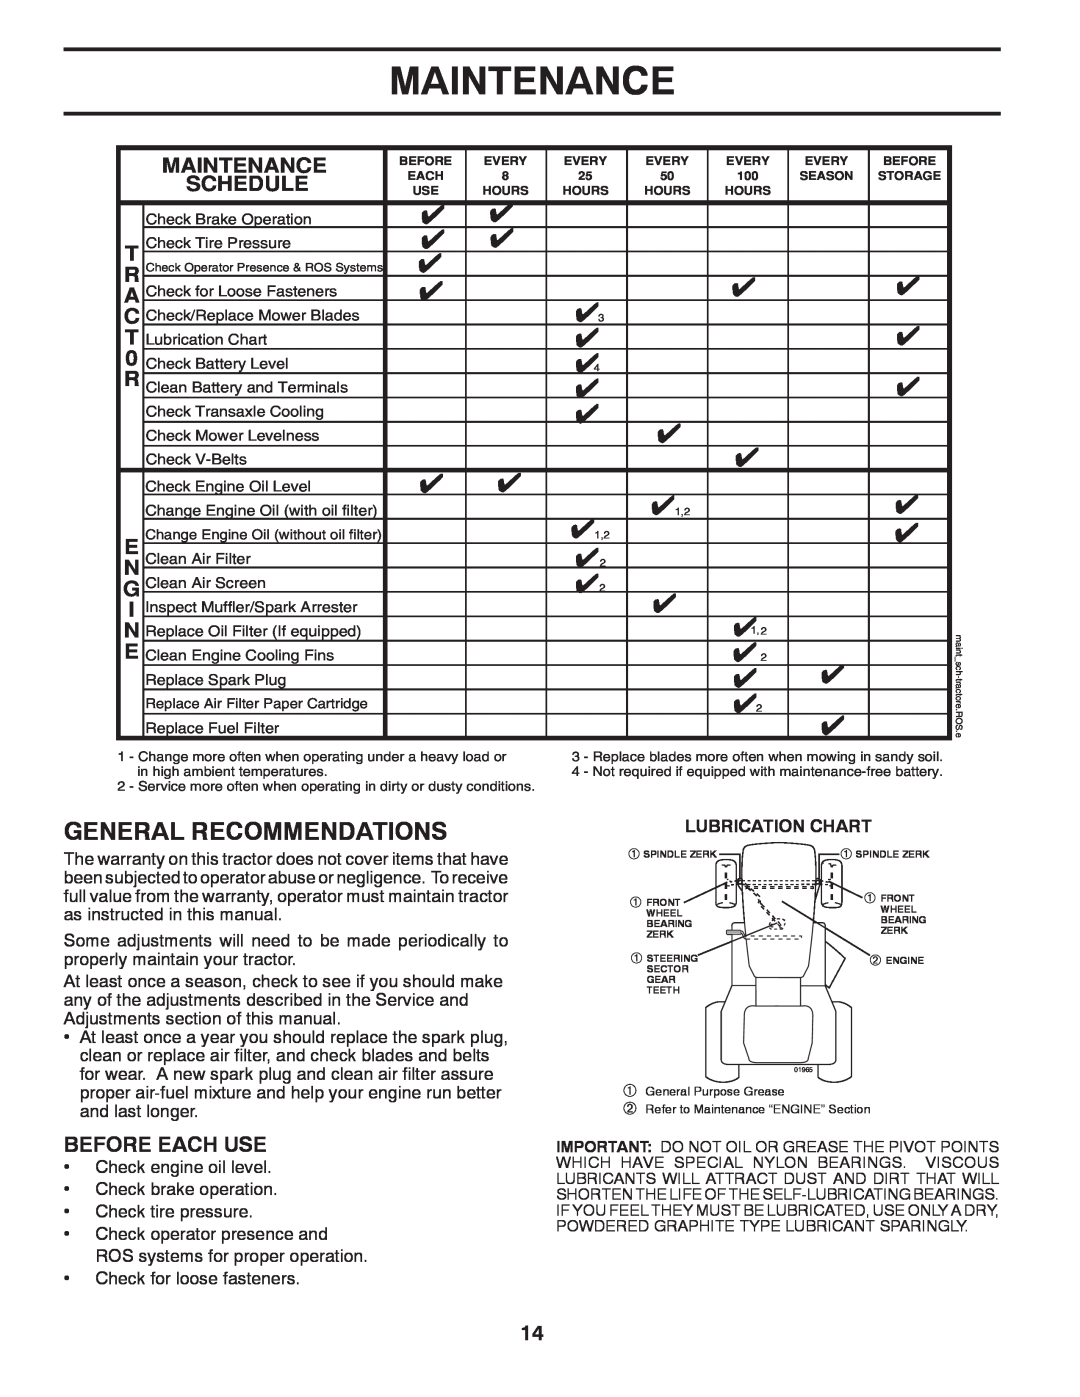 Poulan XT195H46YT manual Maintenance, General Recommendations, Schedule, Before Each Use 